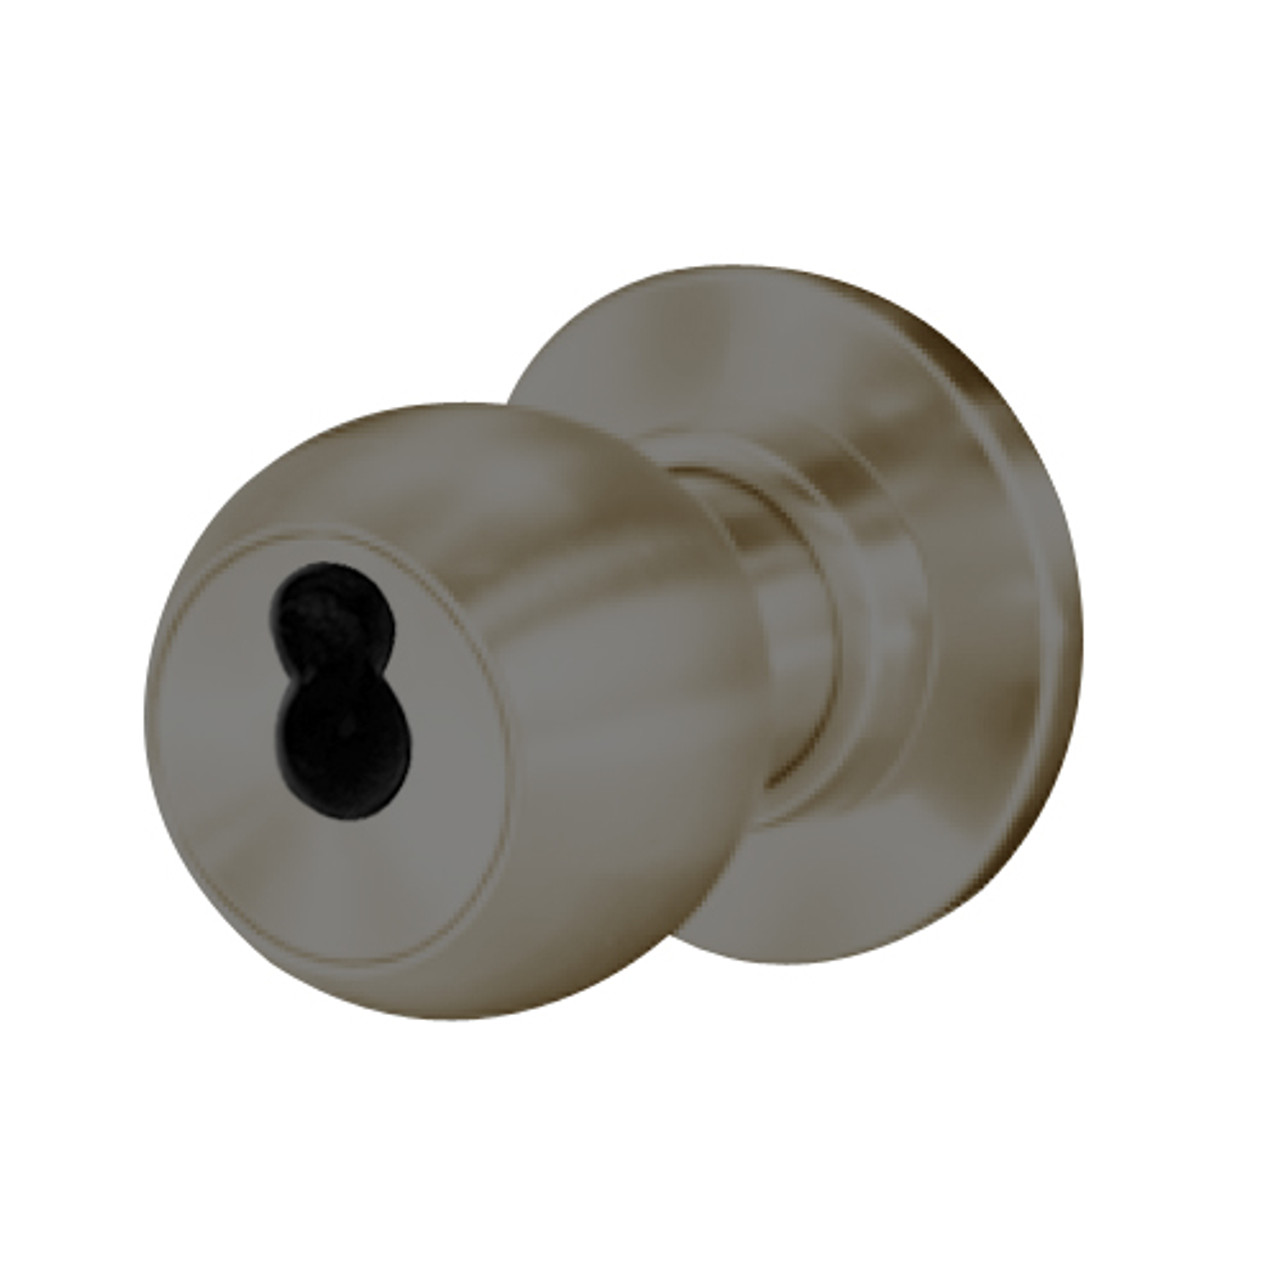 8K47S4CS3613 Best 8K Series Communicating Heavy Duty Cylindrical Knob Locks with Round Style in Oil Rubbed Bronze